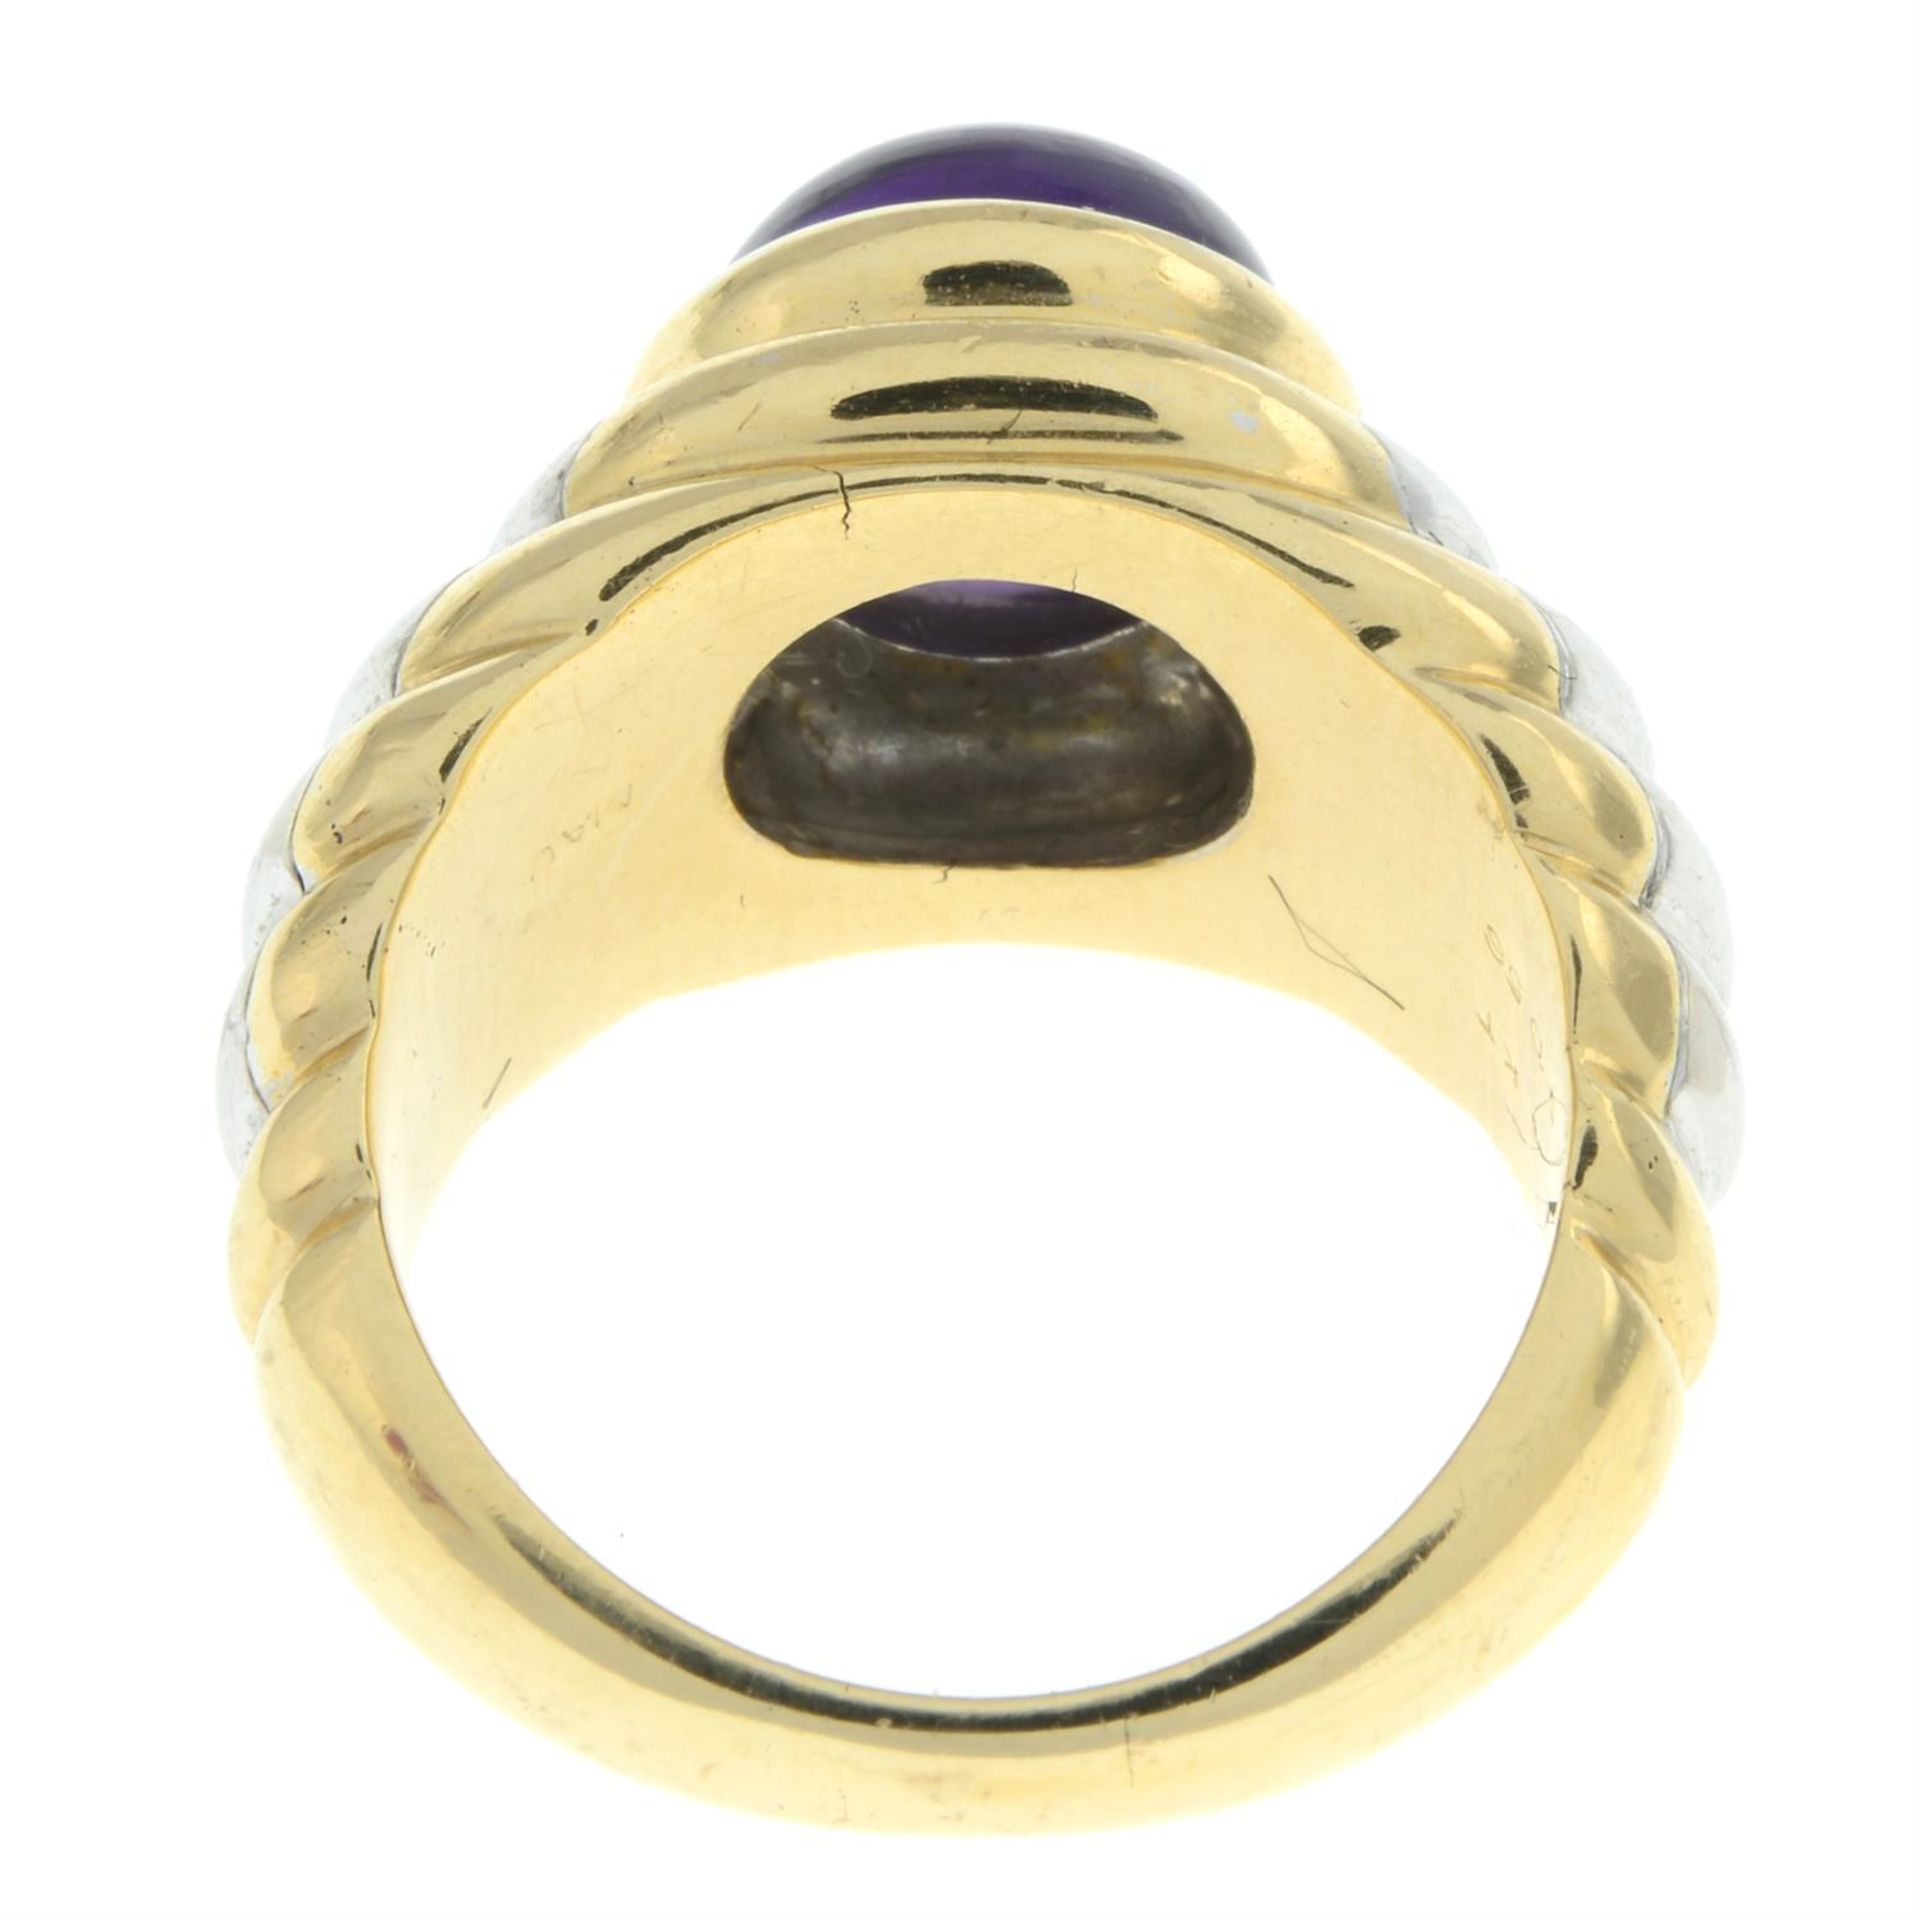 Amethyst ring, by Mauboussin - Image 3 of 5